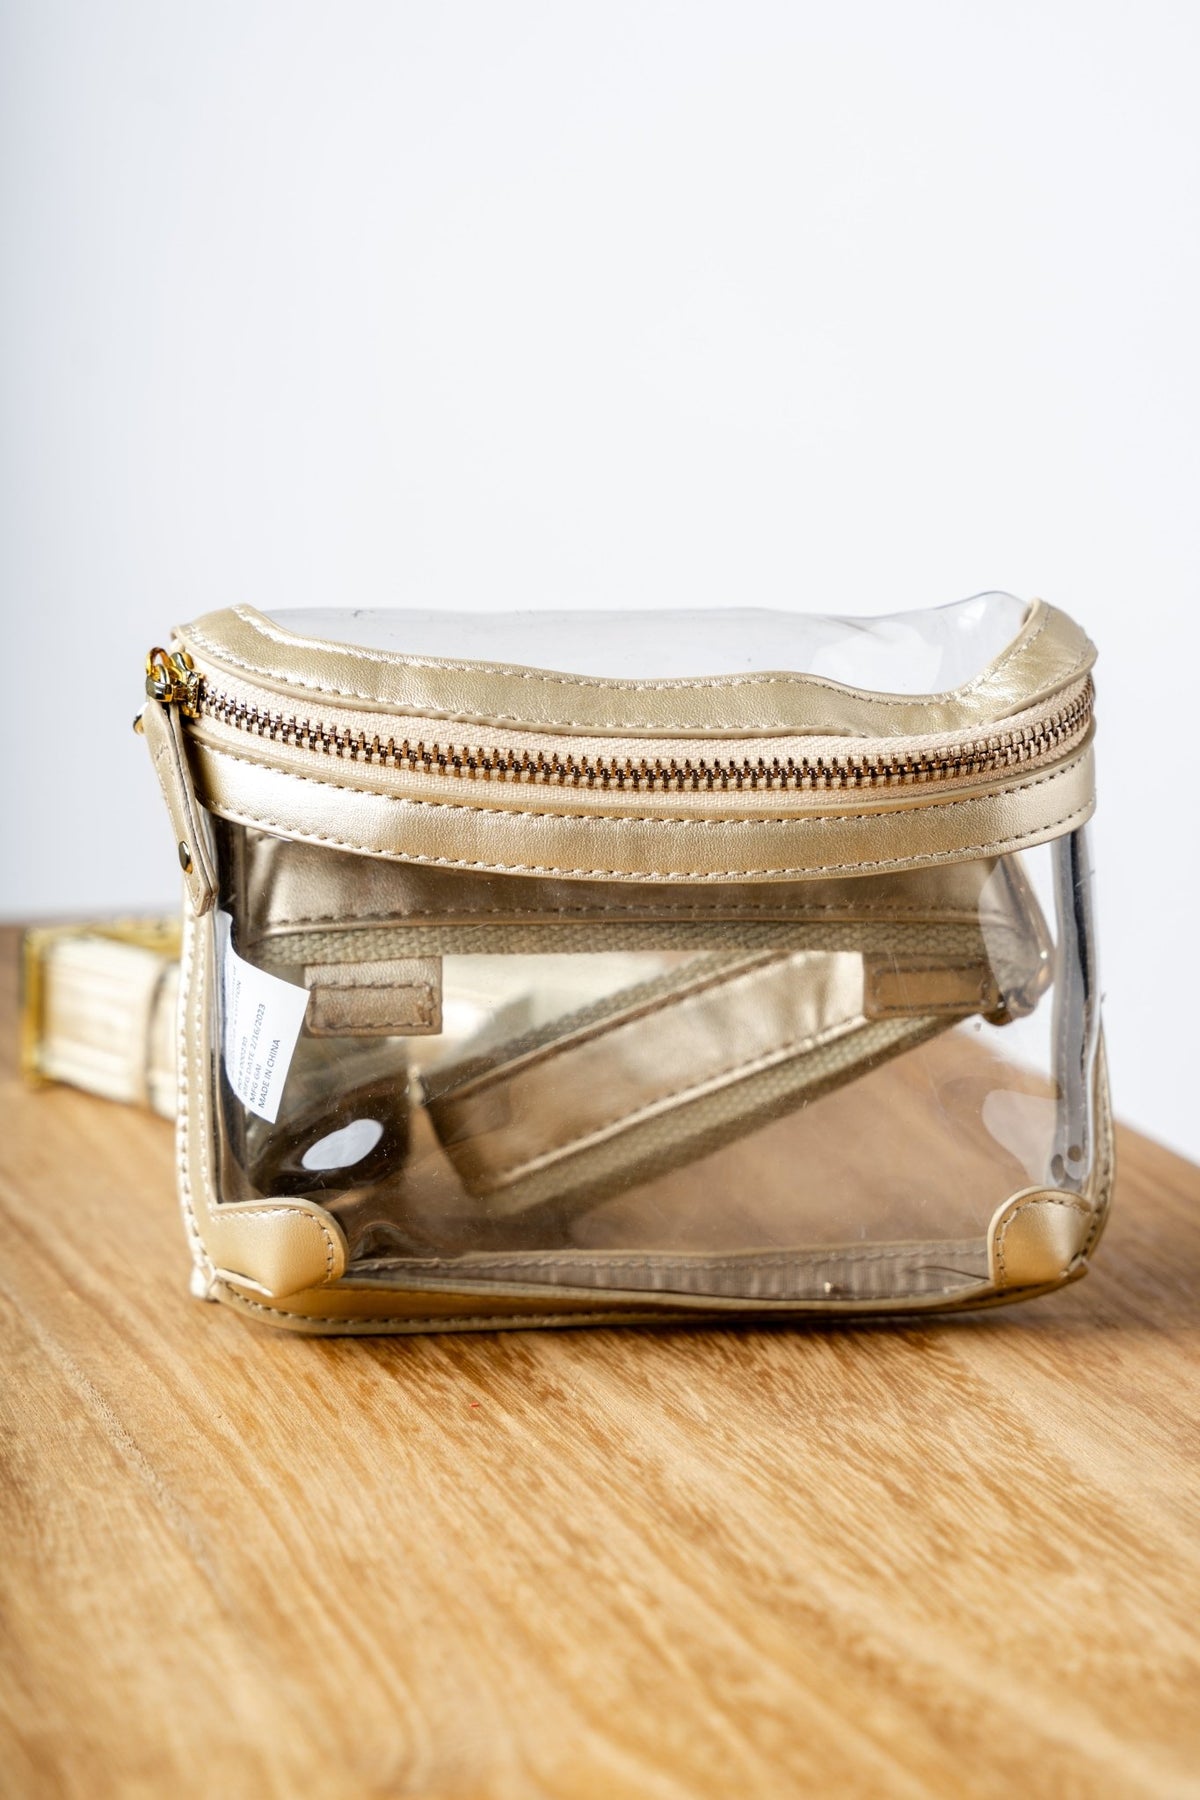 Clear belt bag stadium purse clear - Trendy Bags at Lush Fashion Lounge Boutique in Oklahoma City